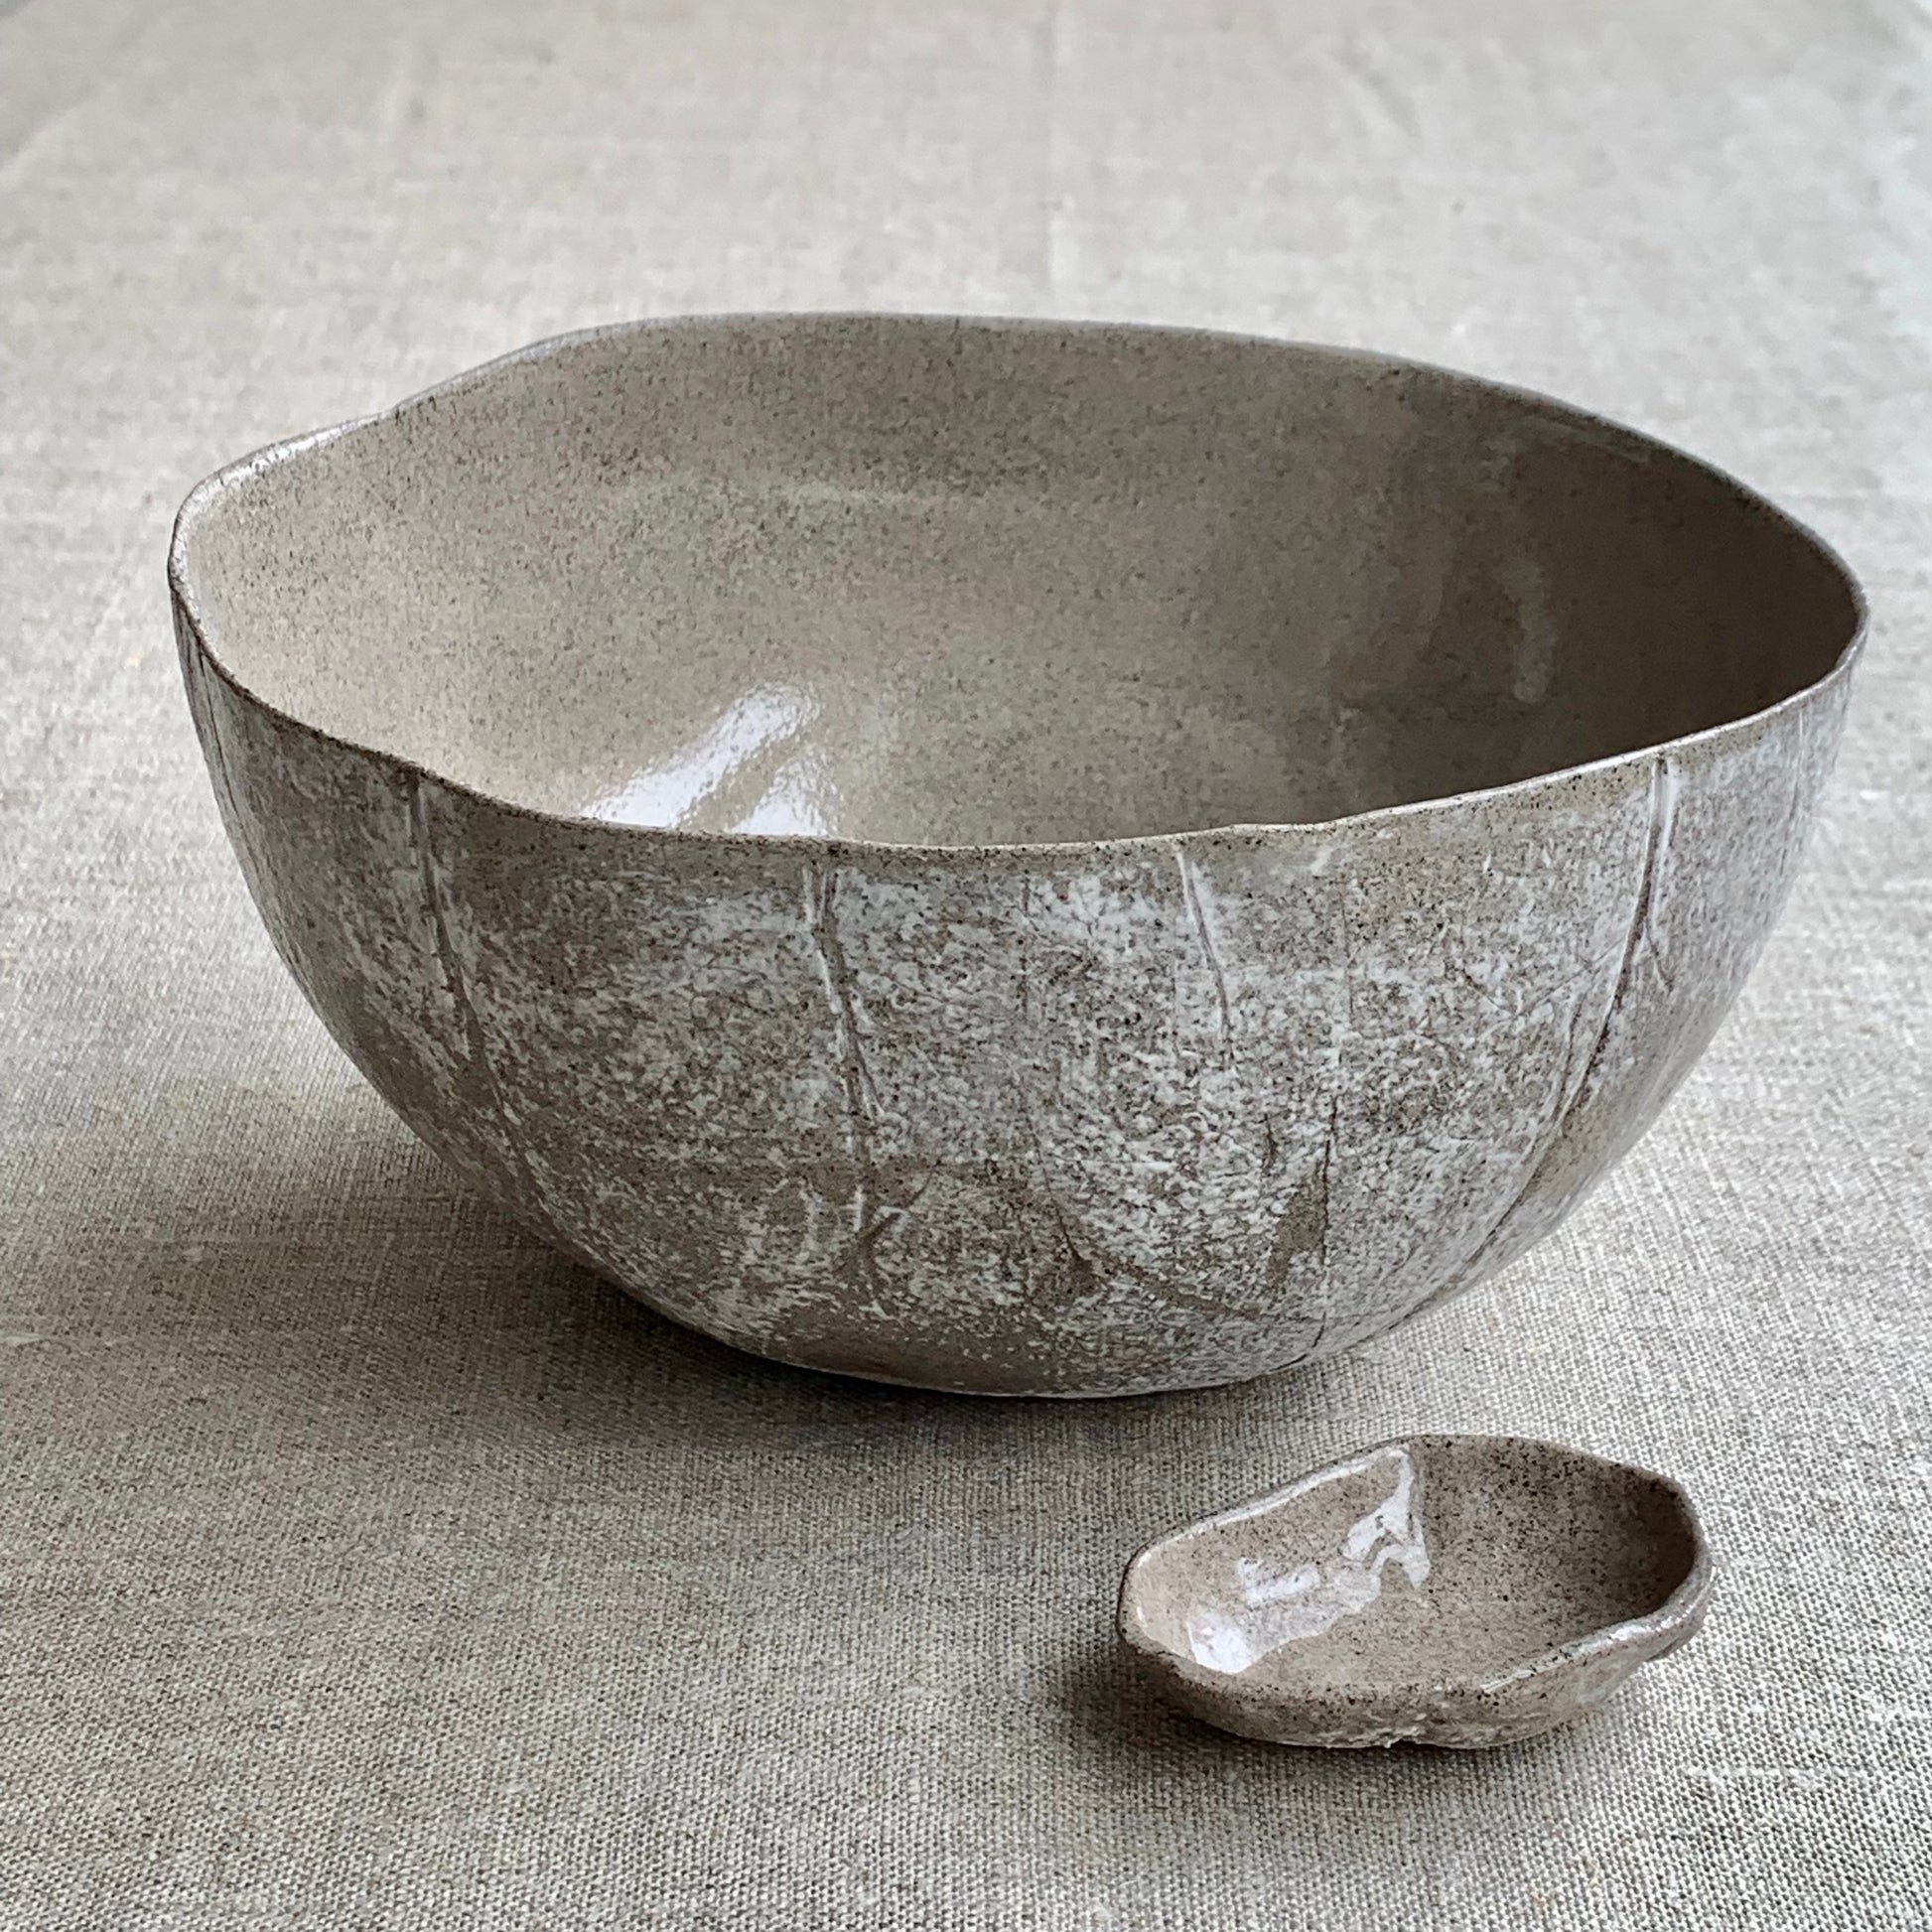 Unique handmade grey ceramic bowl from the Amazon collection. This extra large bowl made of grey clay enriches your table setting with a deep warm feel or will surprise someone as a personal ceramic gift. A one of a kind signature piece of tableware with a unique design and white porcelain slib